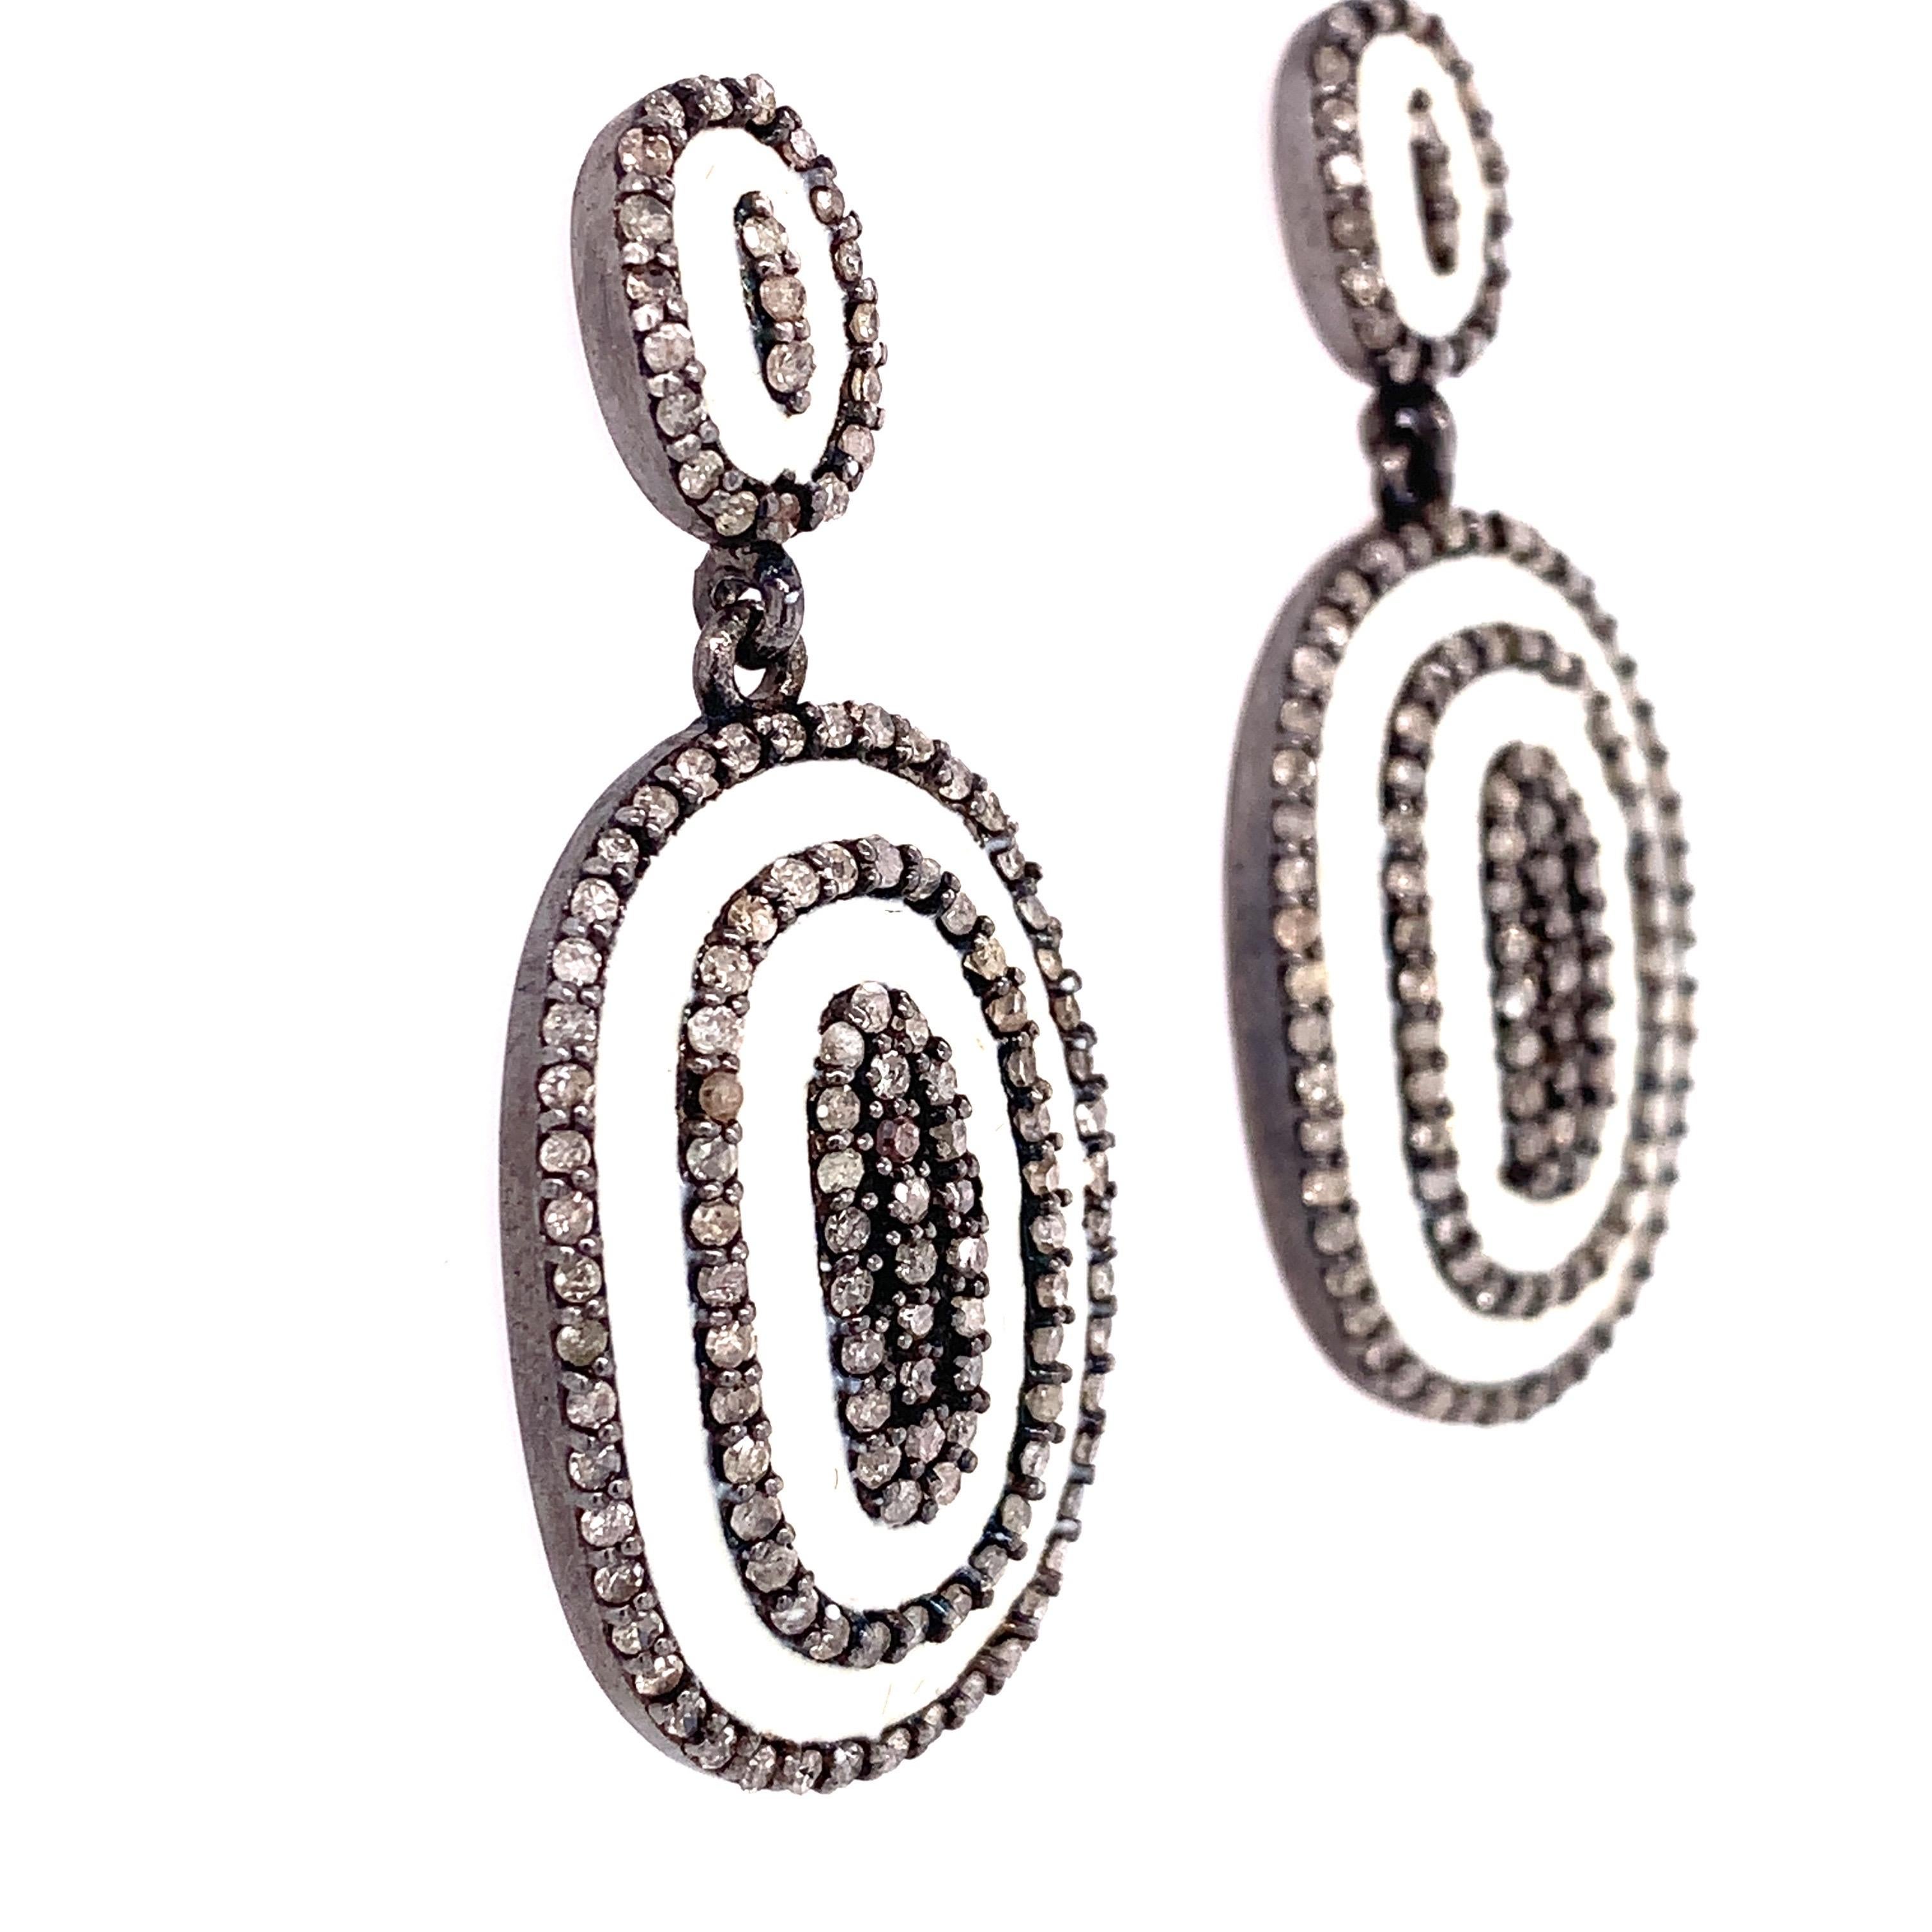 Rustic Collection

Oval Shape droop earrings with Rustic Diamonds and enamel set in blackened sterling silver.

Rustic Diamond:  2.60ct total weight.
